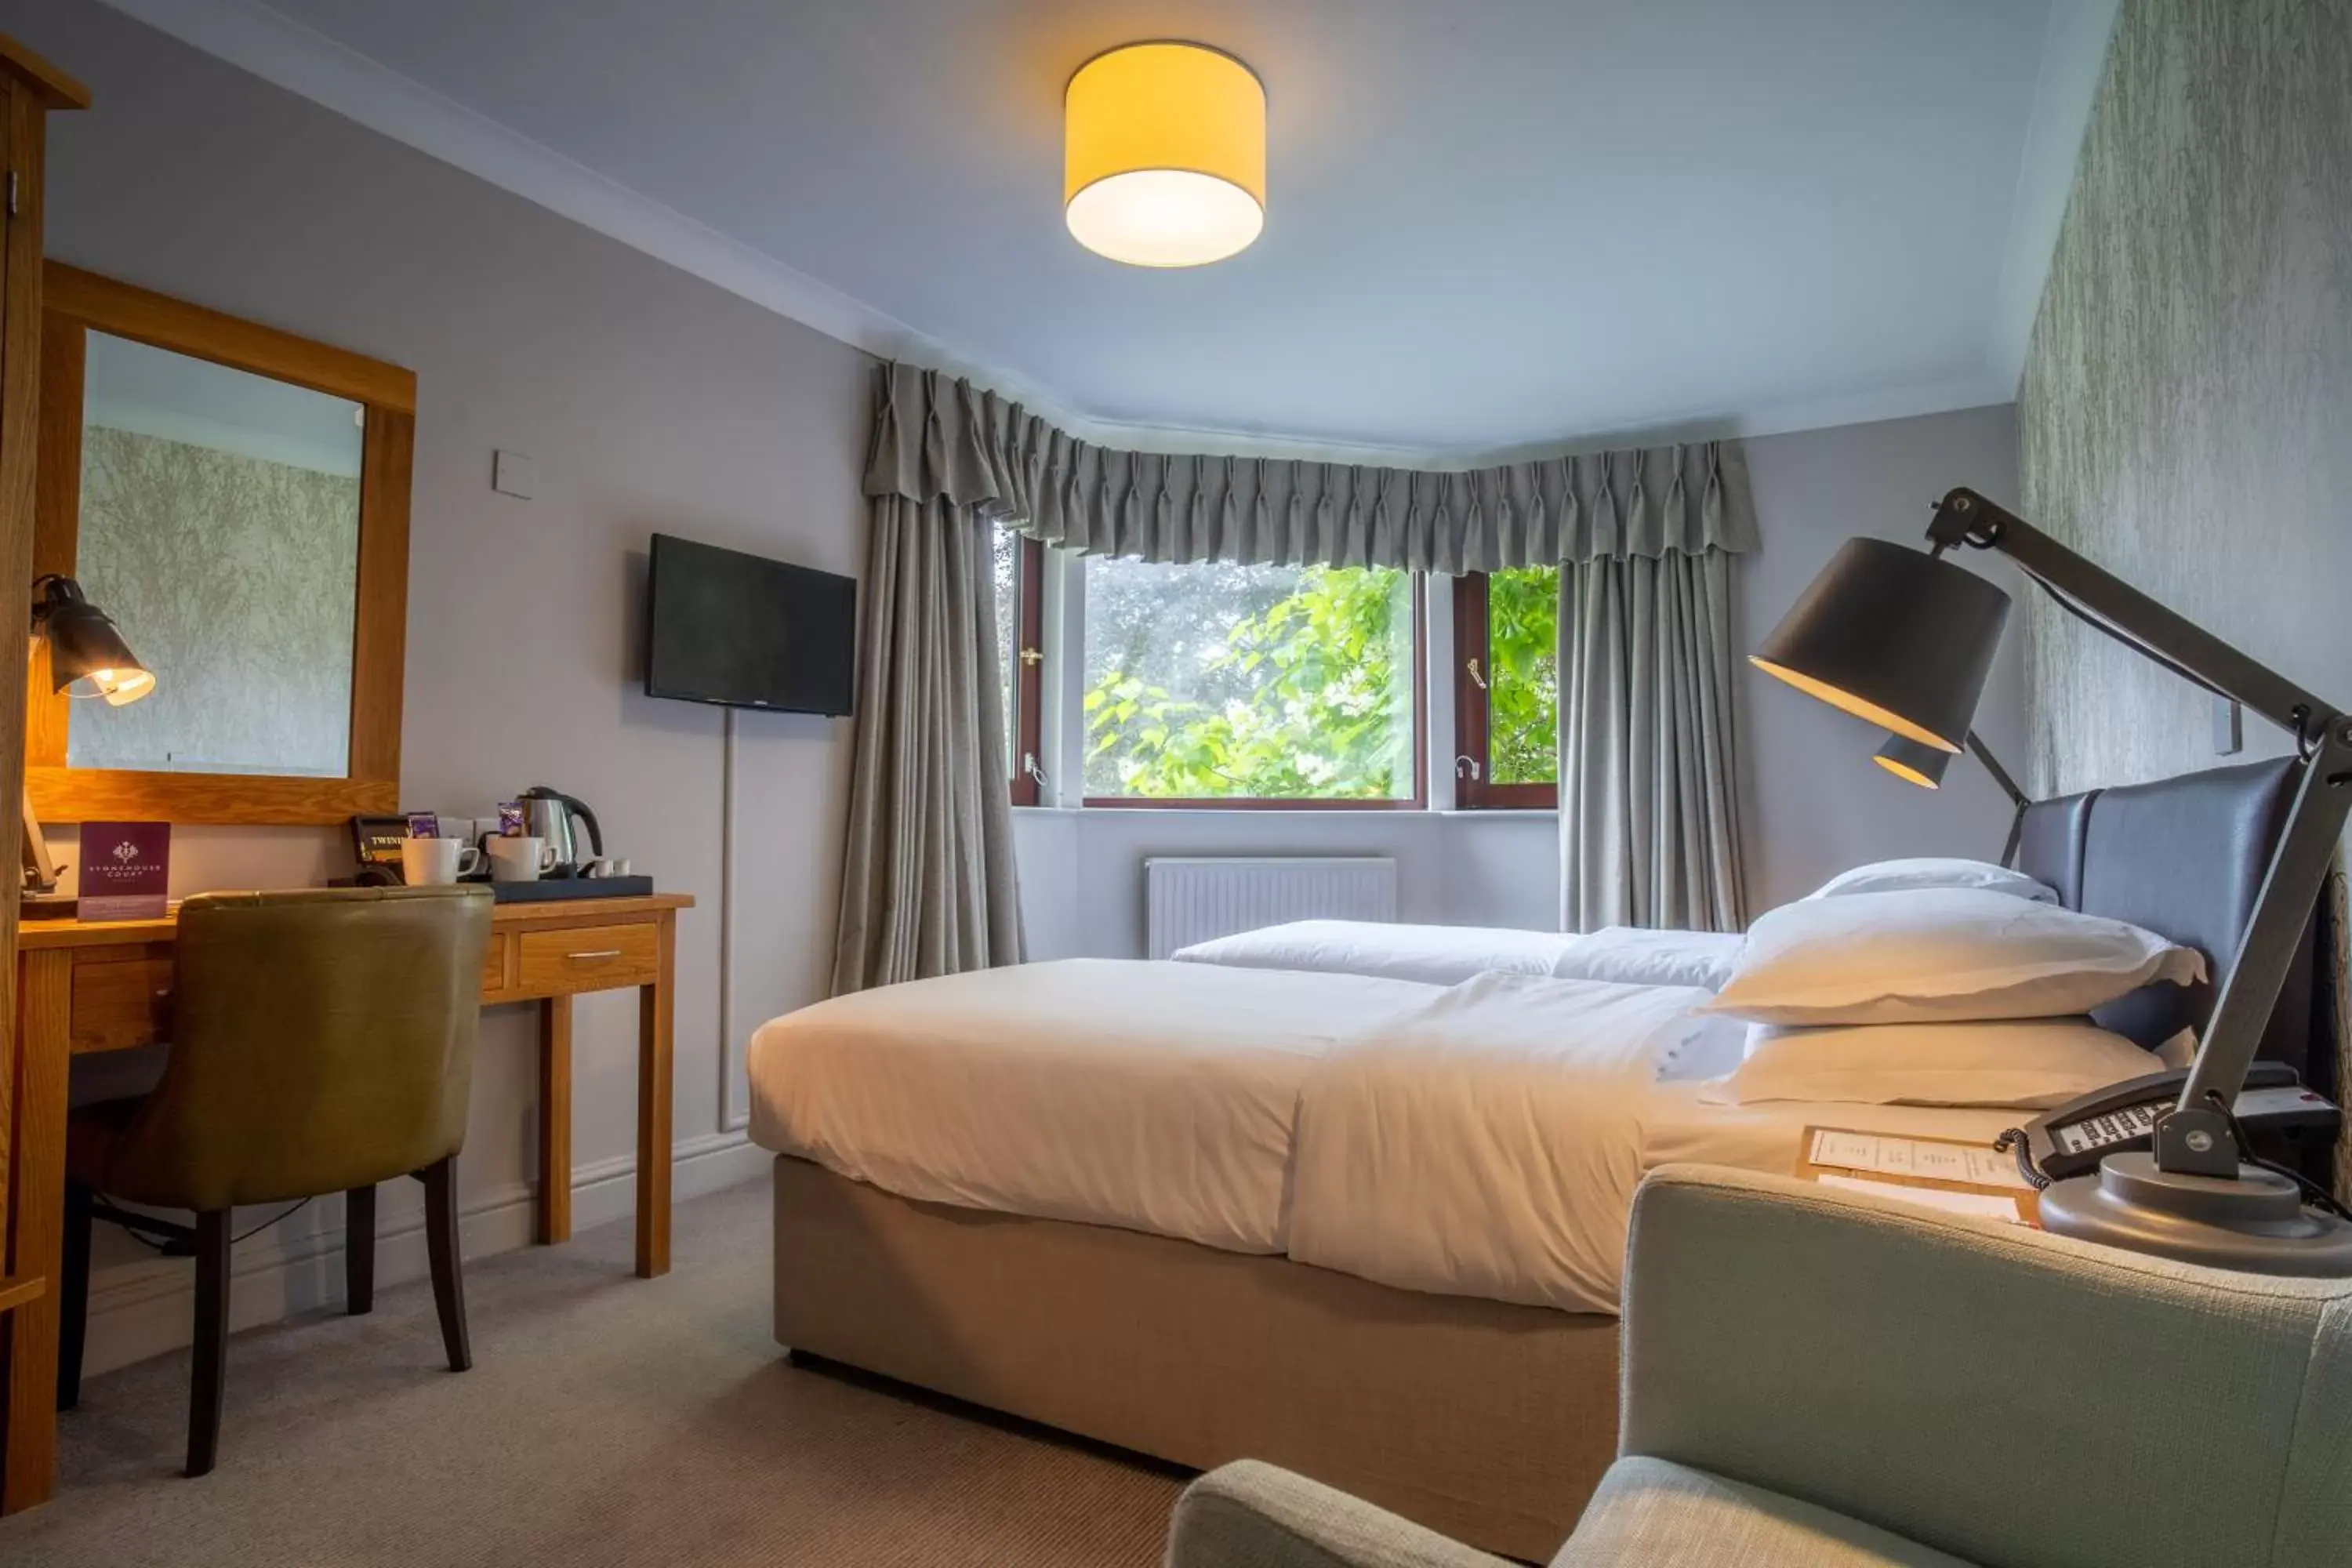 Bedroom in Stonehouse Court Hotel - A Bespoke Hotel